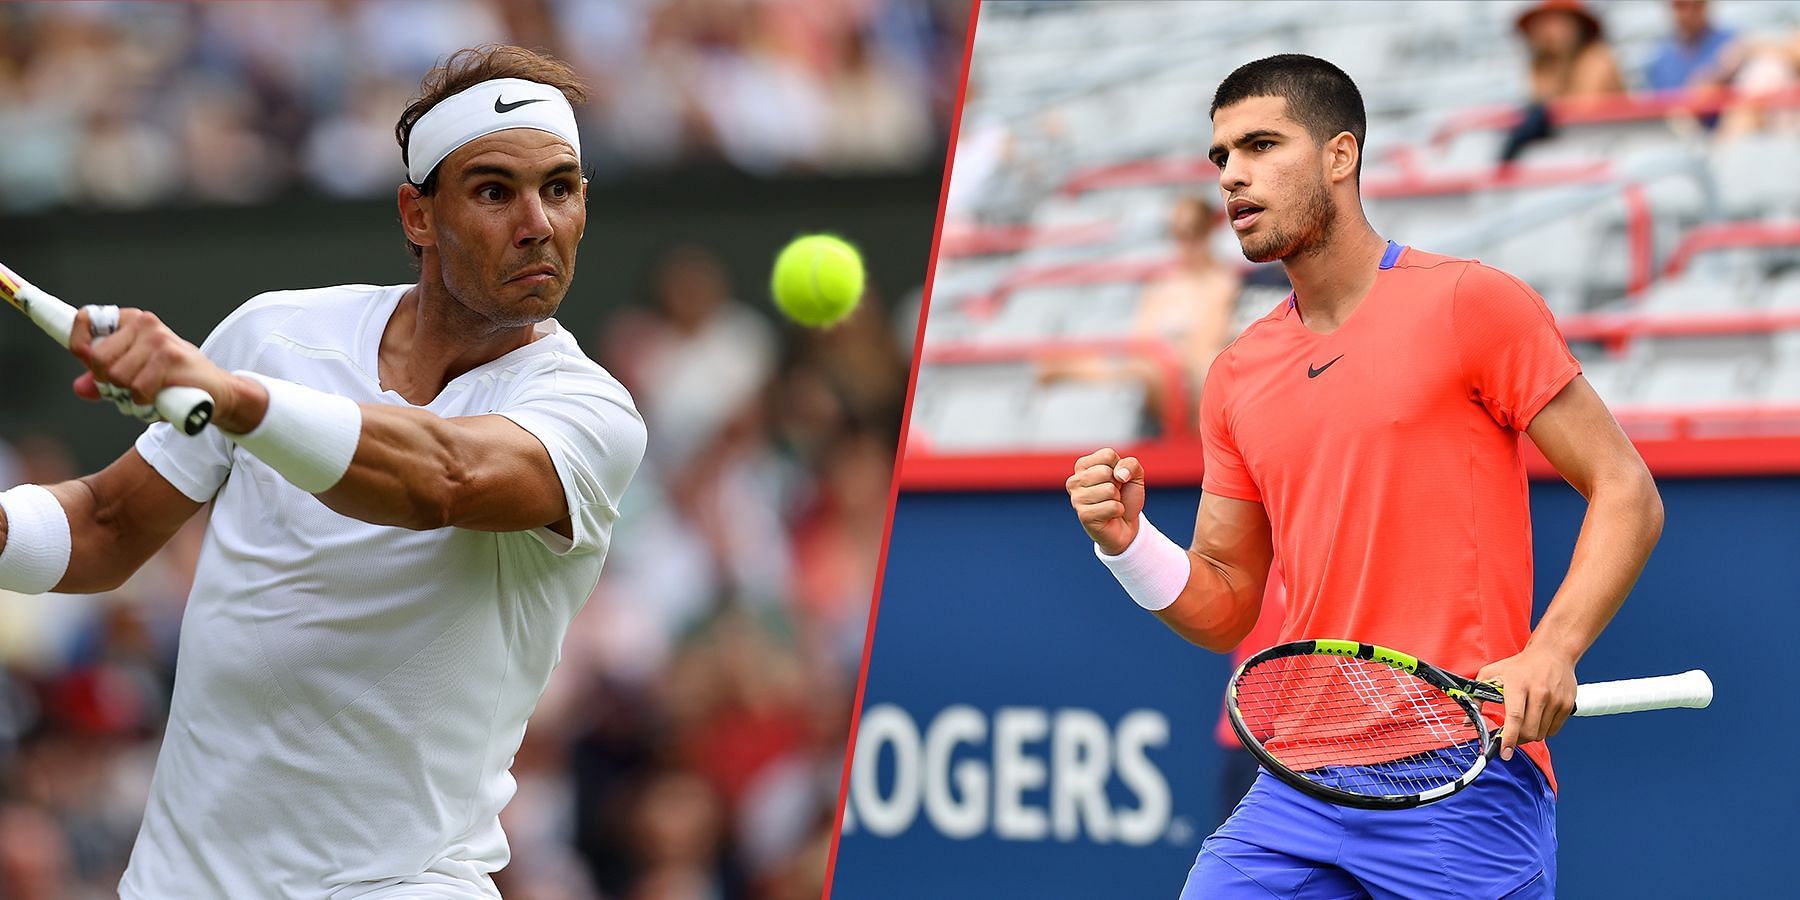 Rafael Nadal and Carlos Alcaraz will look to light up the Western &amp; Southern Open in Cincinnati